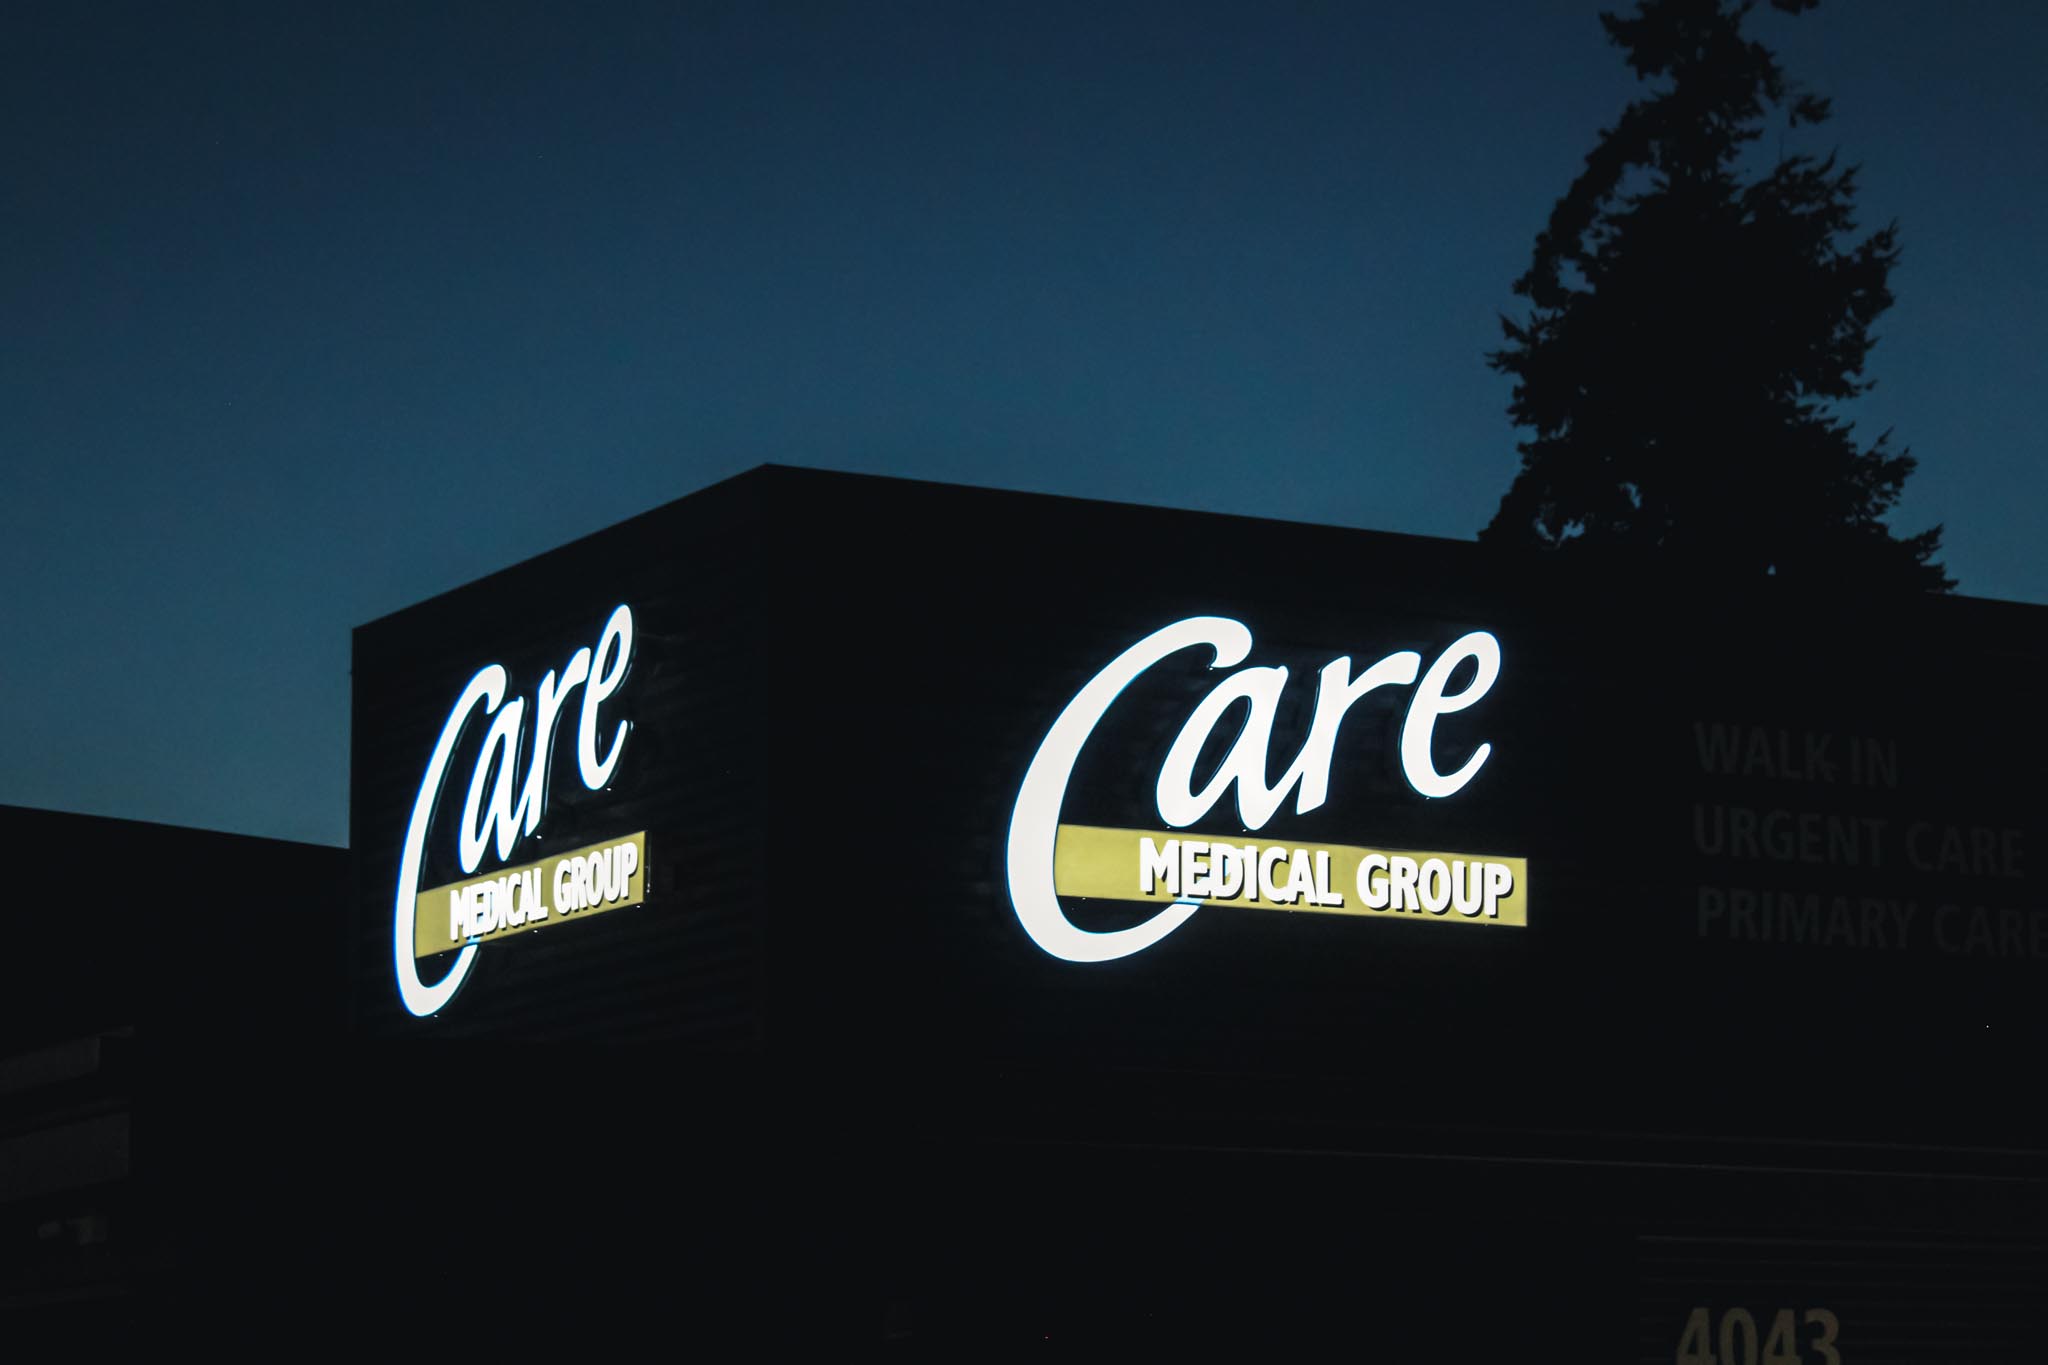 care-medical-group-exterior-illuminated-channel-letters-signage-at-night